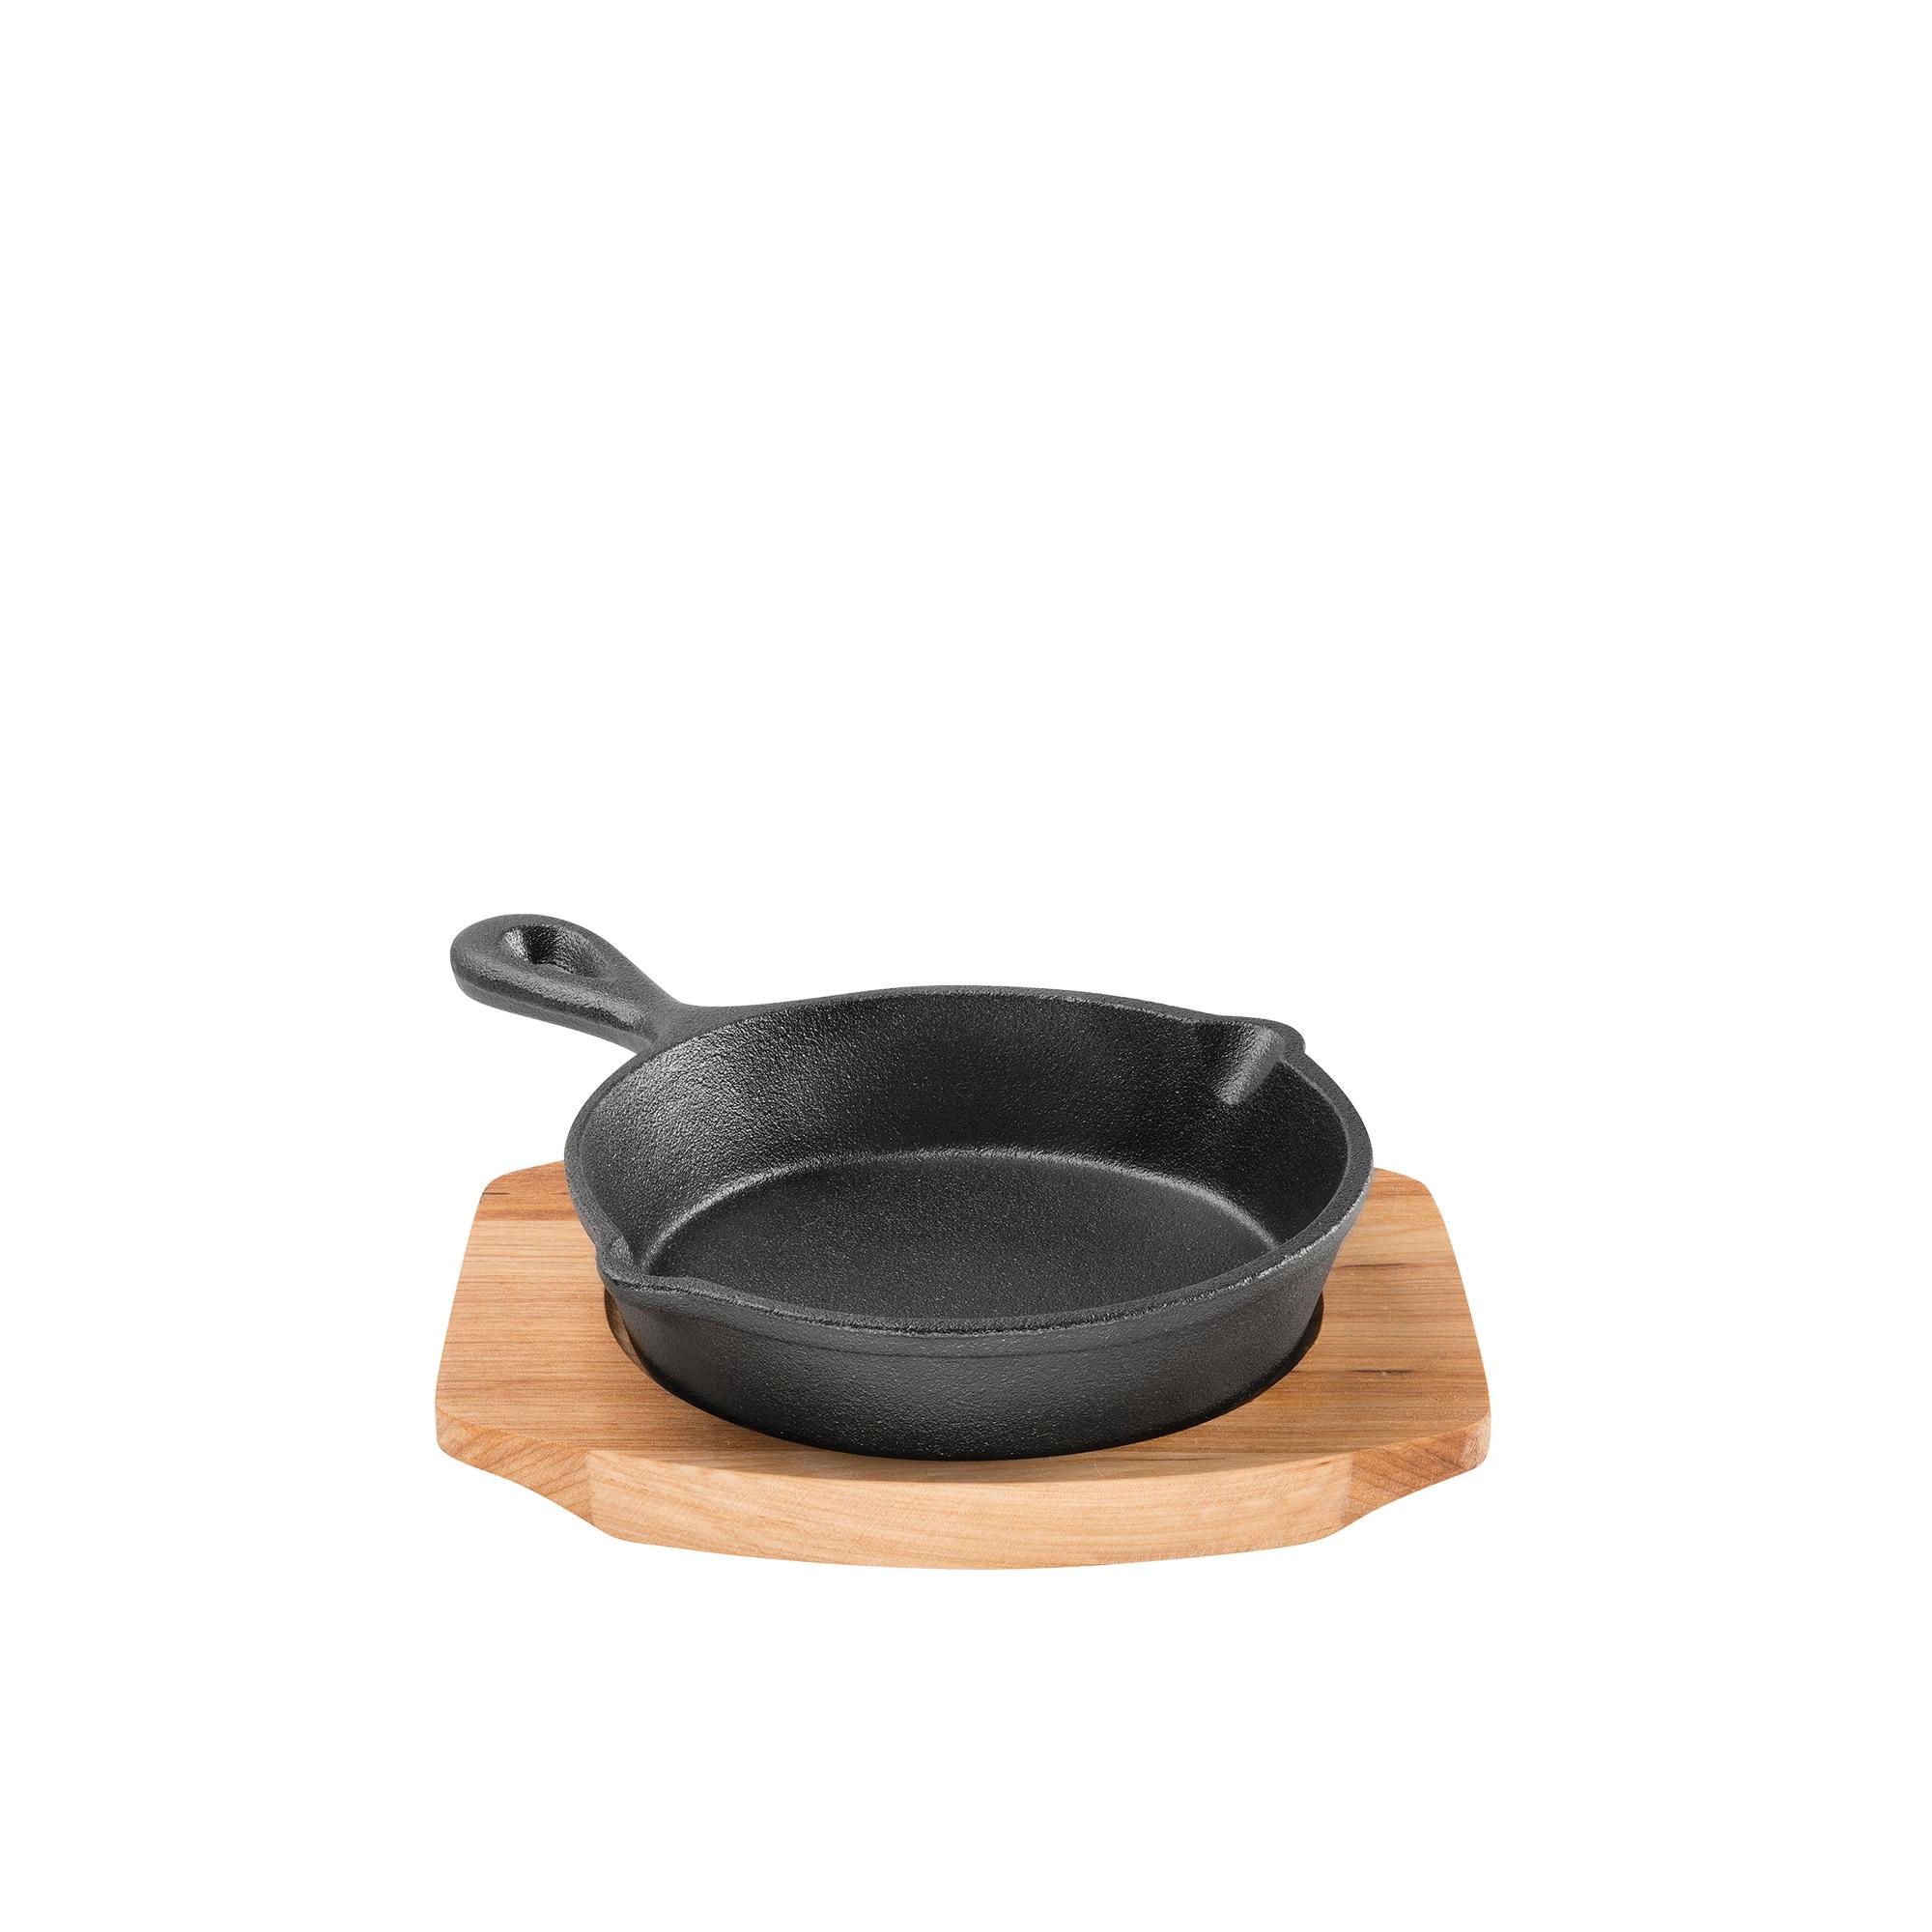 Pyrolux Pyrocast Cast Iron Skillet with Maple Tray 13.5cm Image 1